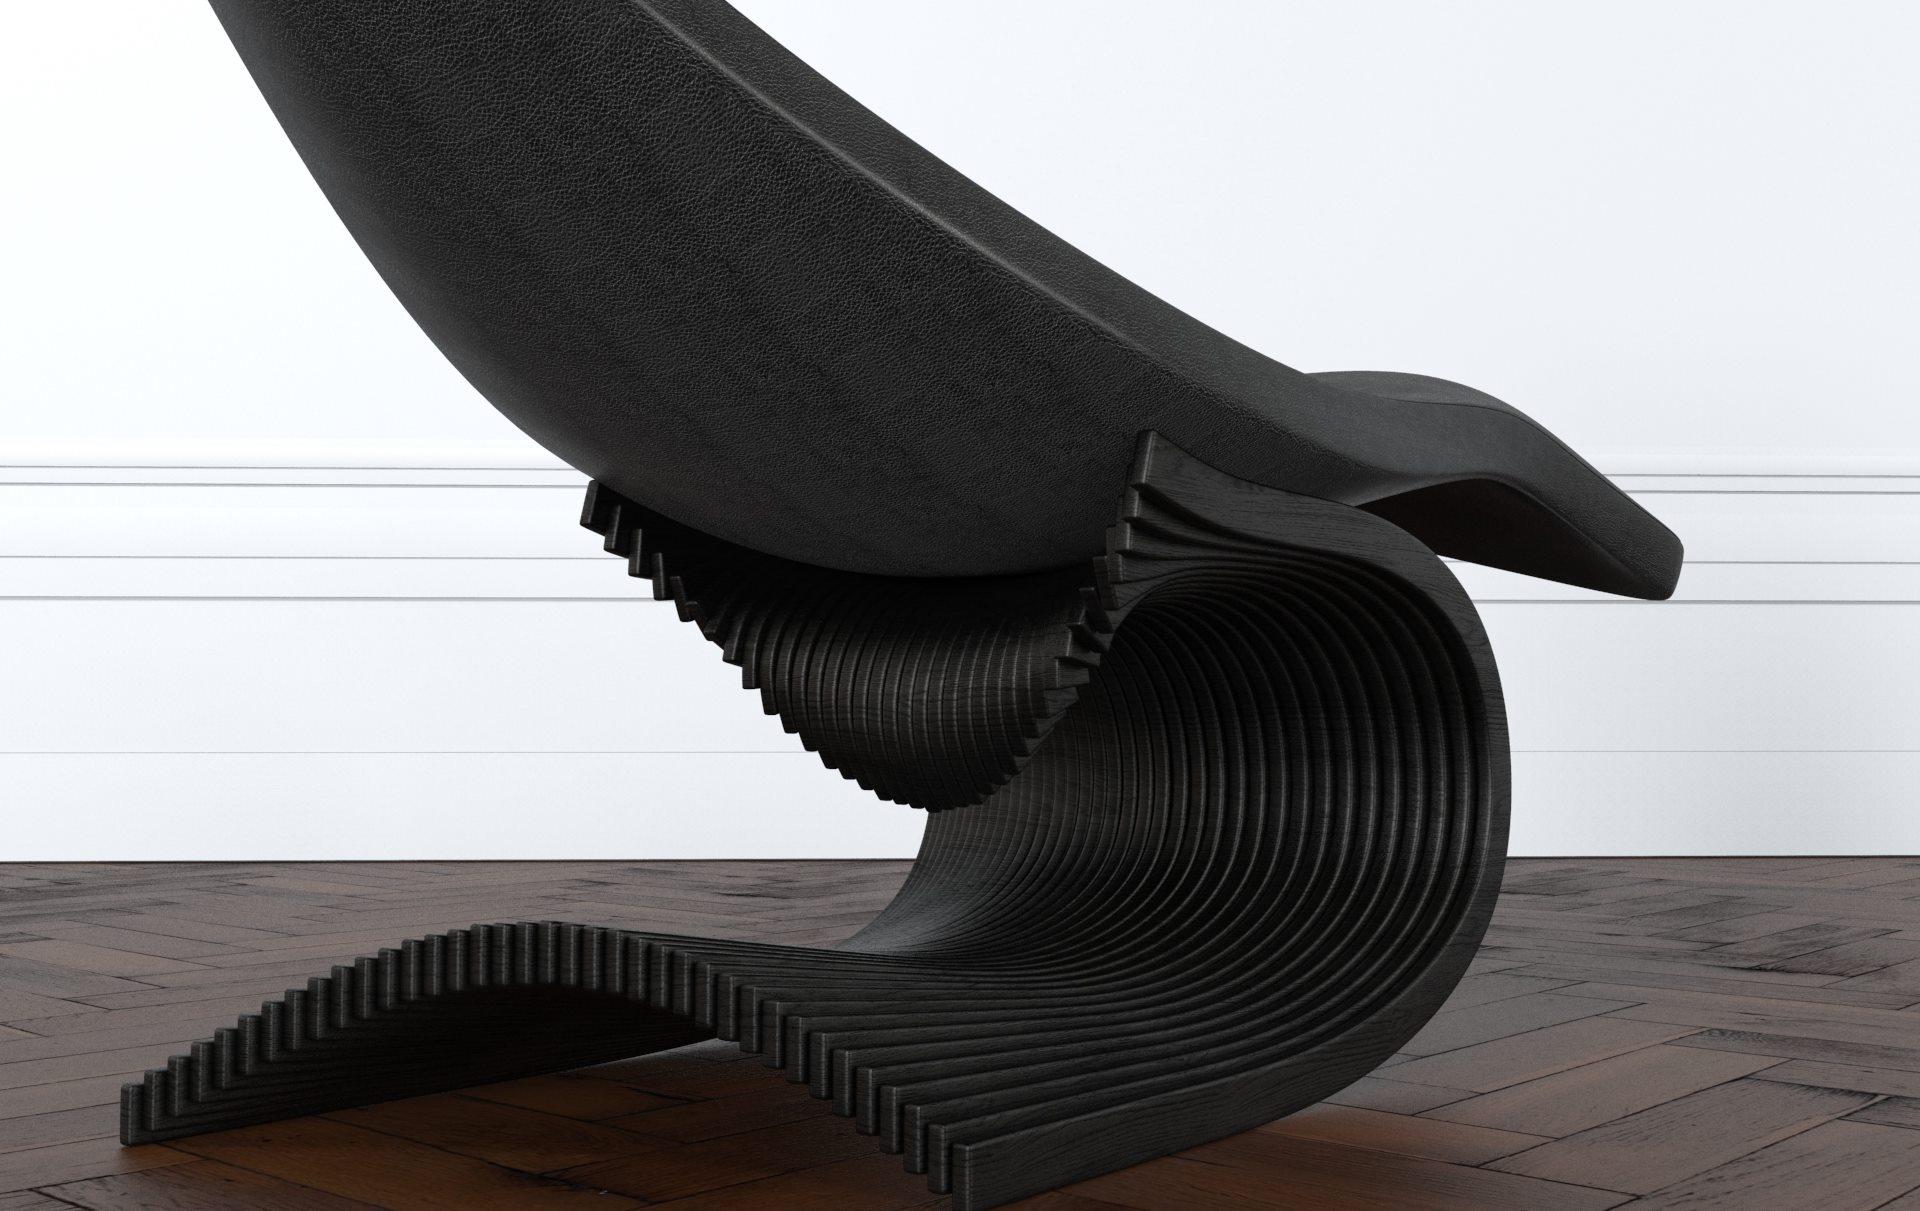 Contemporary, sleek and stylish. The OMI rocking chaise is available in a variety of finishes and materials. The organic parametric base made from singular slats of wood gently compressed to create an all in one beautiful wave-like structure.